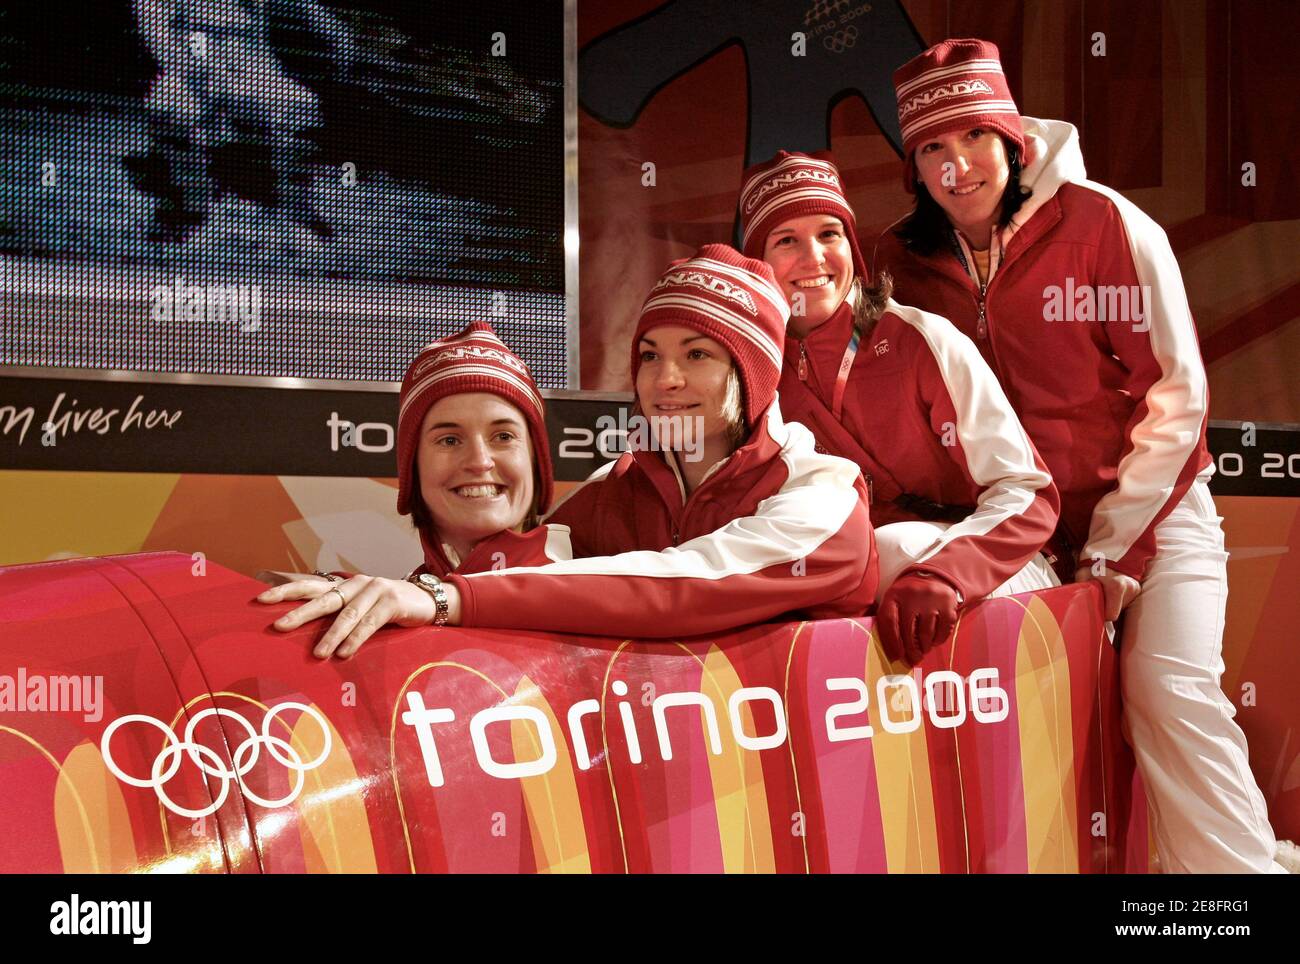 Members of Canada's women's hockey team sit in a bobsleigh following a ceremony at which the Canadian flag was raised in the athlete's village at the Torino 2006 Winter Olympic Games in Turin February 8, 2006. (From L to R)Gina Kingsbury, Sarah Vaillancourt, Kim St.Pierre and Caroline Ouellet.        REUTERS/Andy Clark Stock Photo